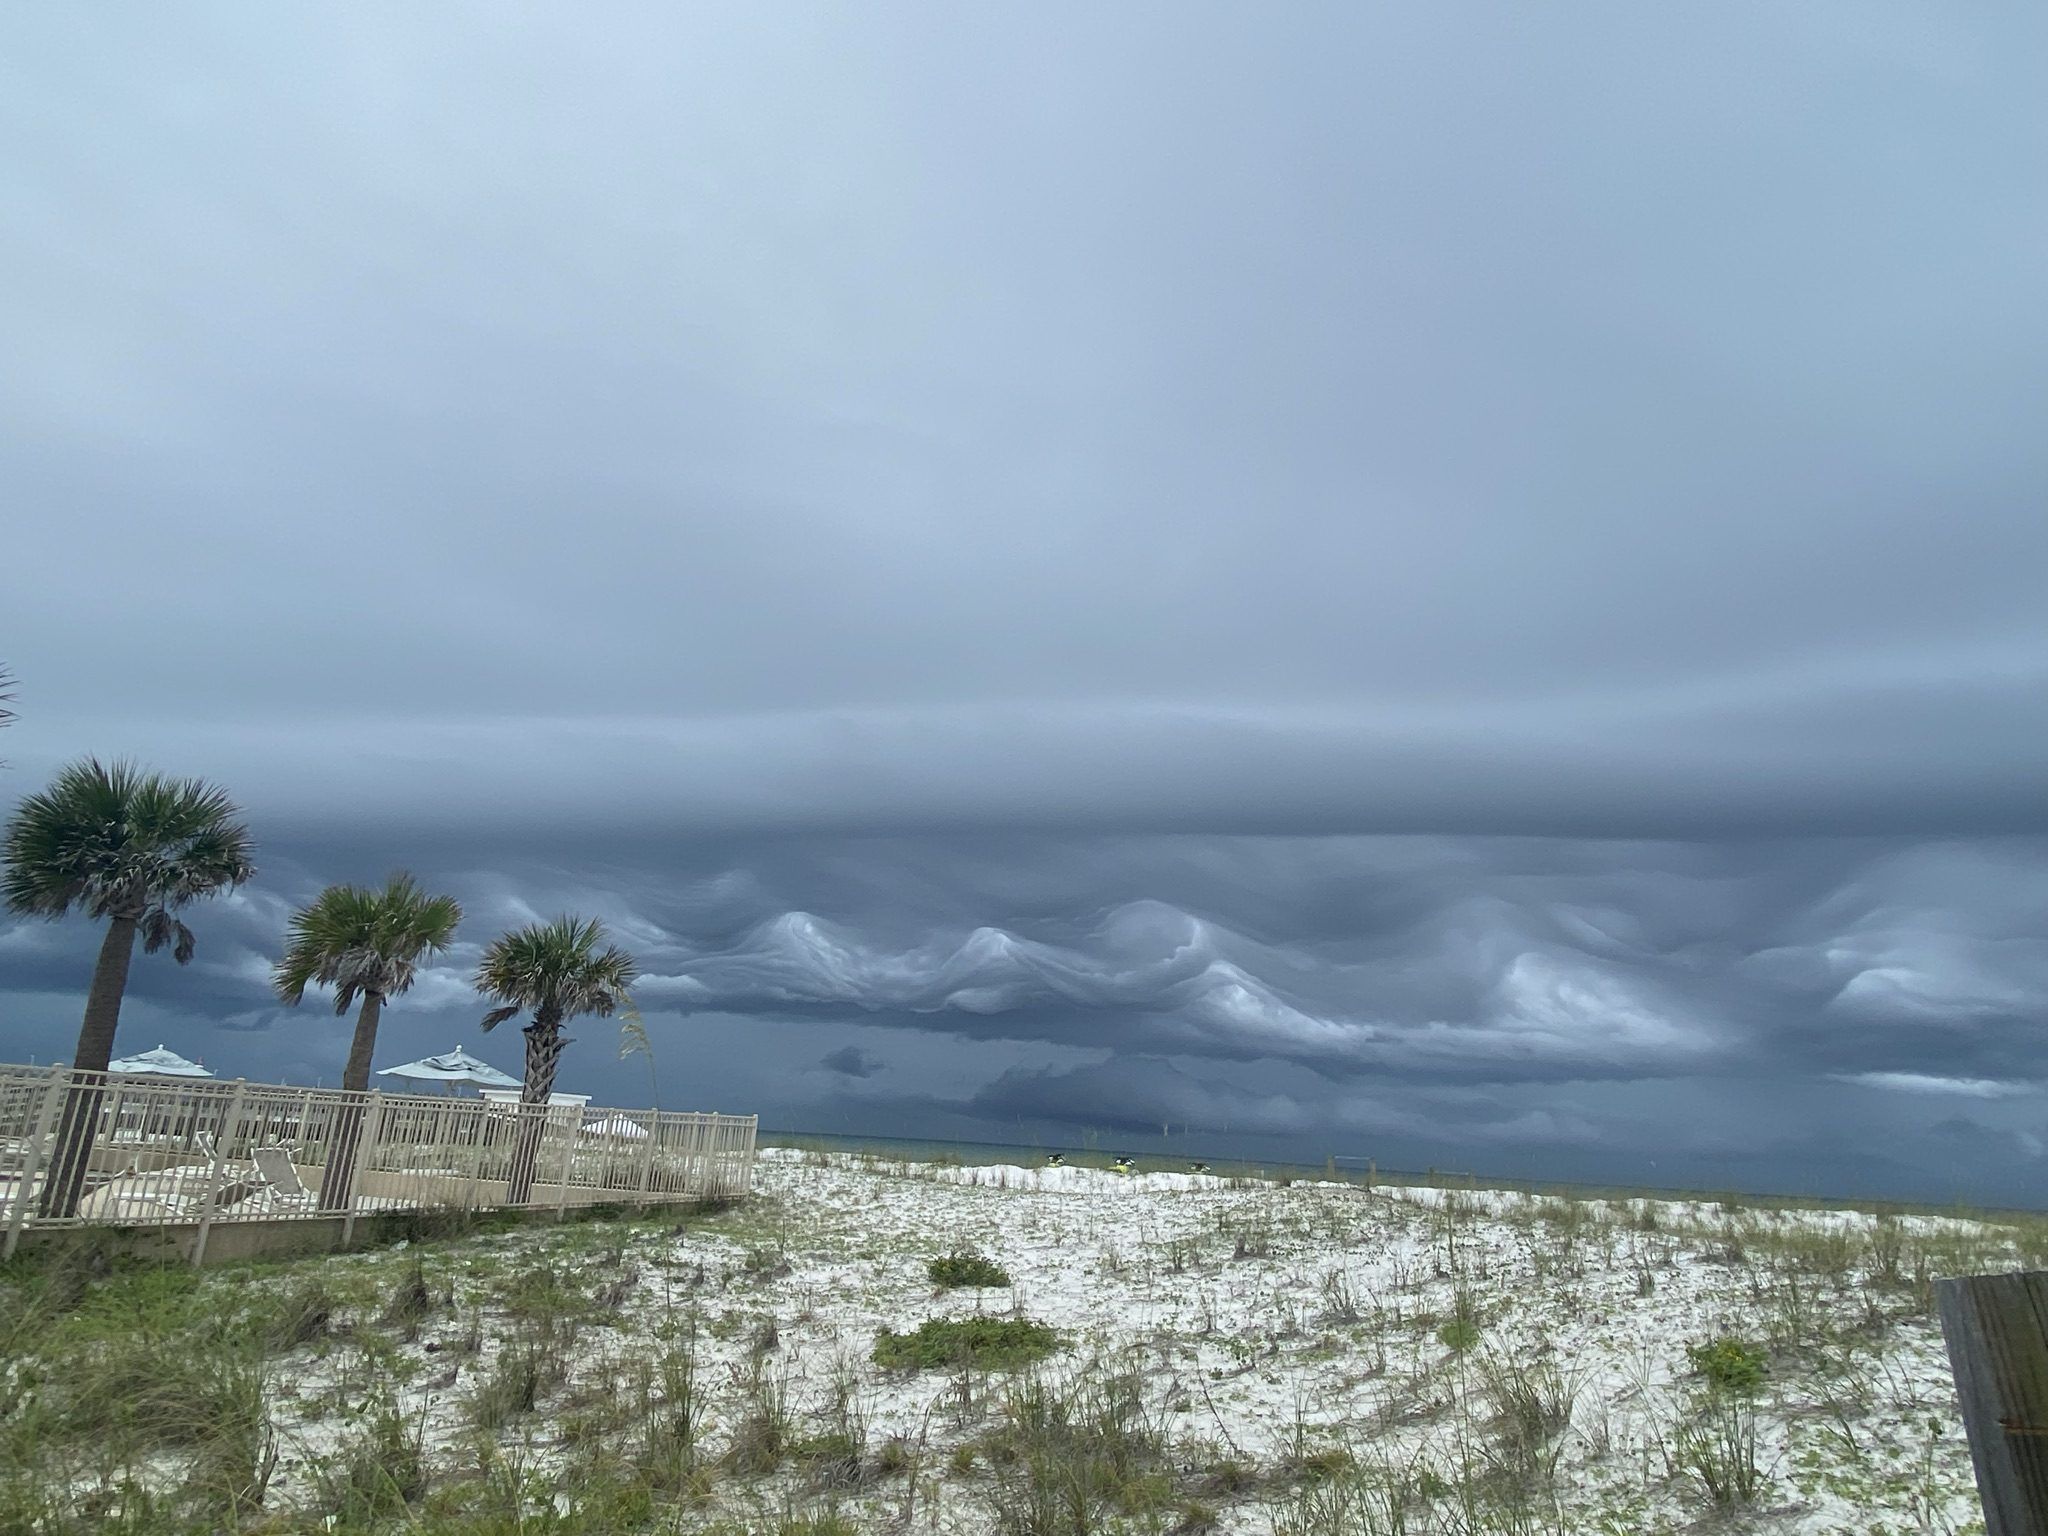 Today's Photo of the Day comes from Kim Ripley, who took this photo while heading into Destin. These rare, wave-like clouds are known as Kelvin-Helmholtz clouds. The National Weather Service defines this phenomenon as, "vertical waves in the air associated with wind shear across statically-stable regions." ☁️